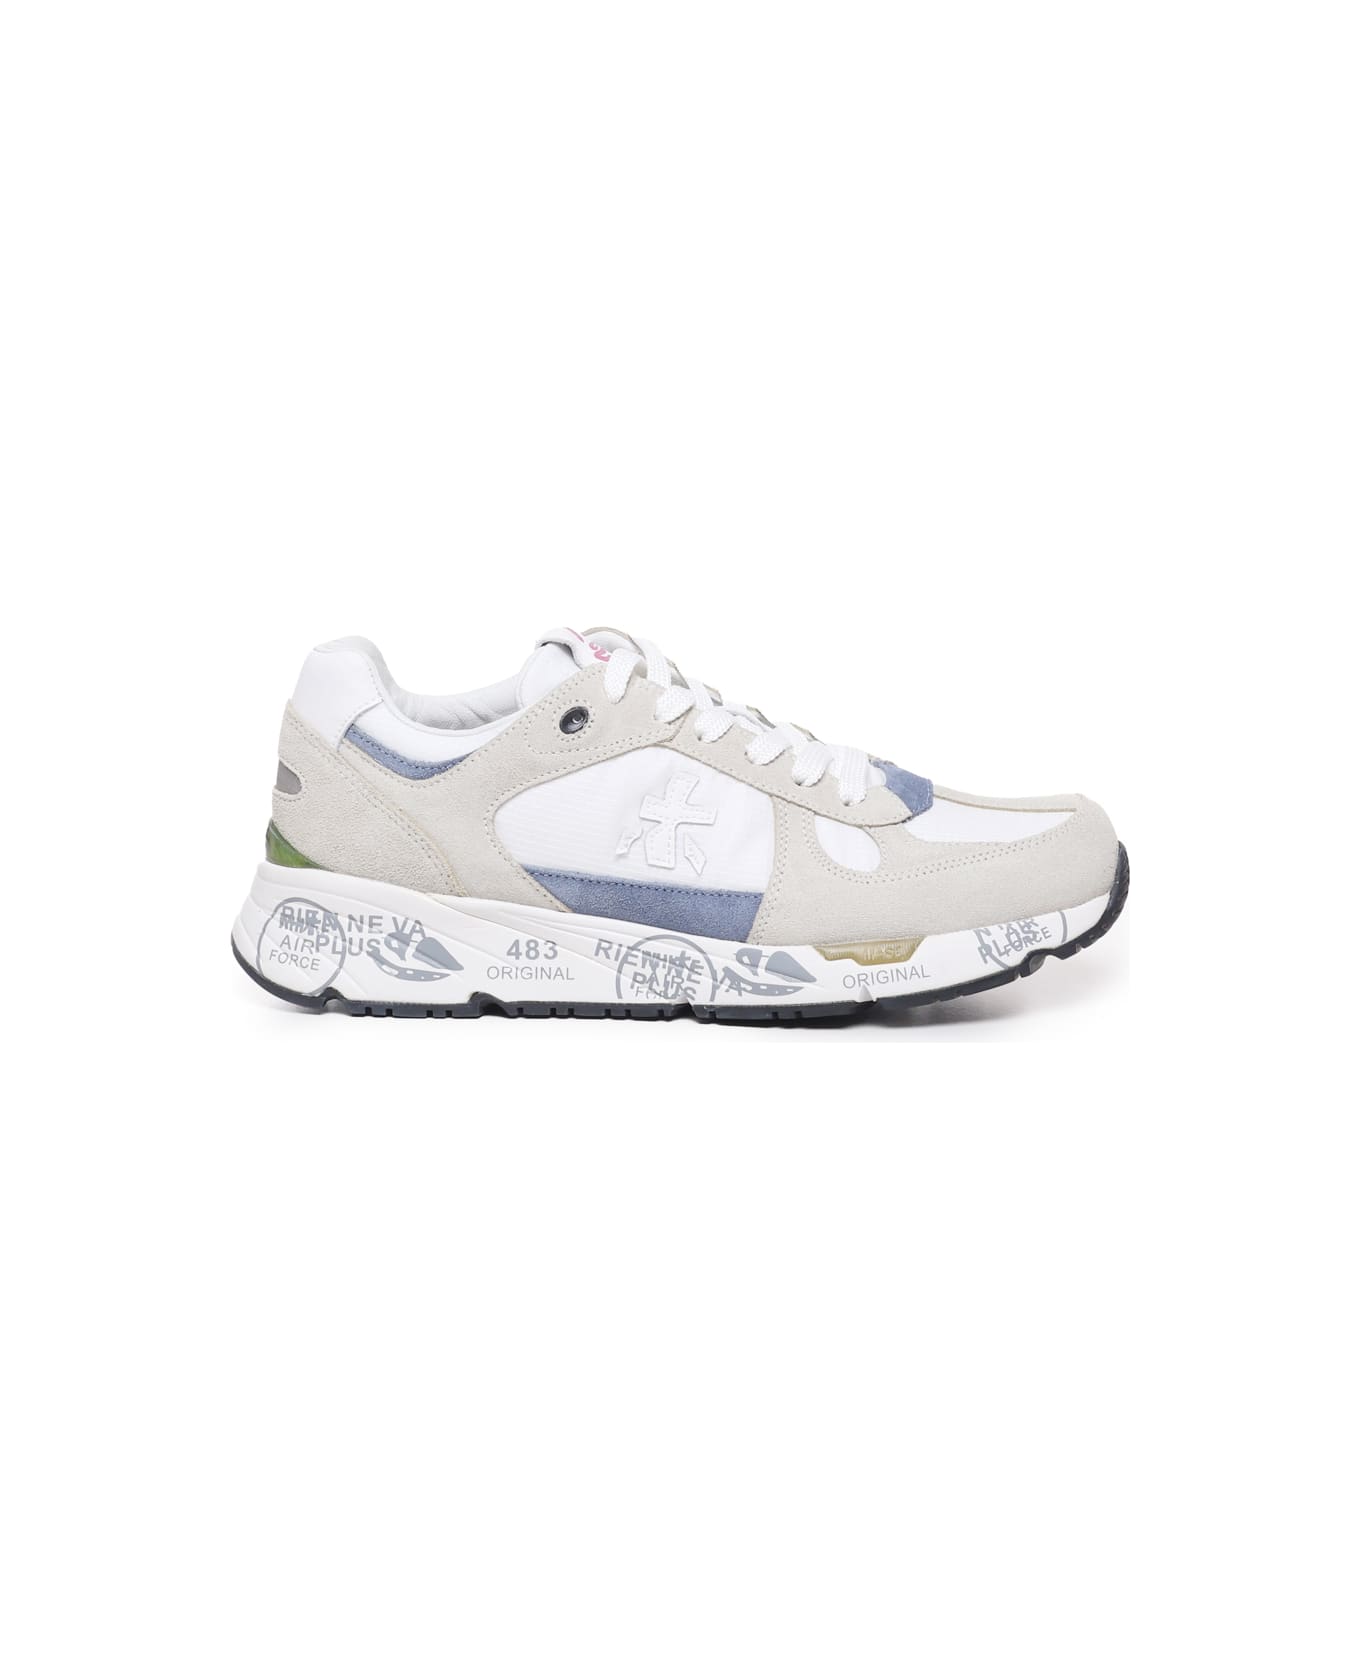 Premiata Mase Sneakers With Contrasting Inserts